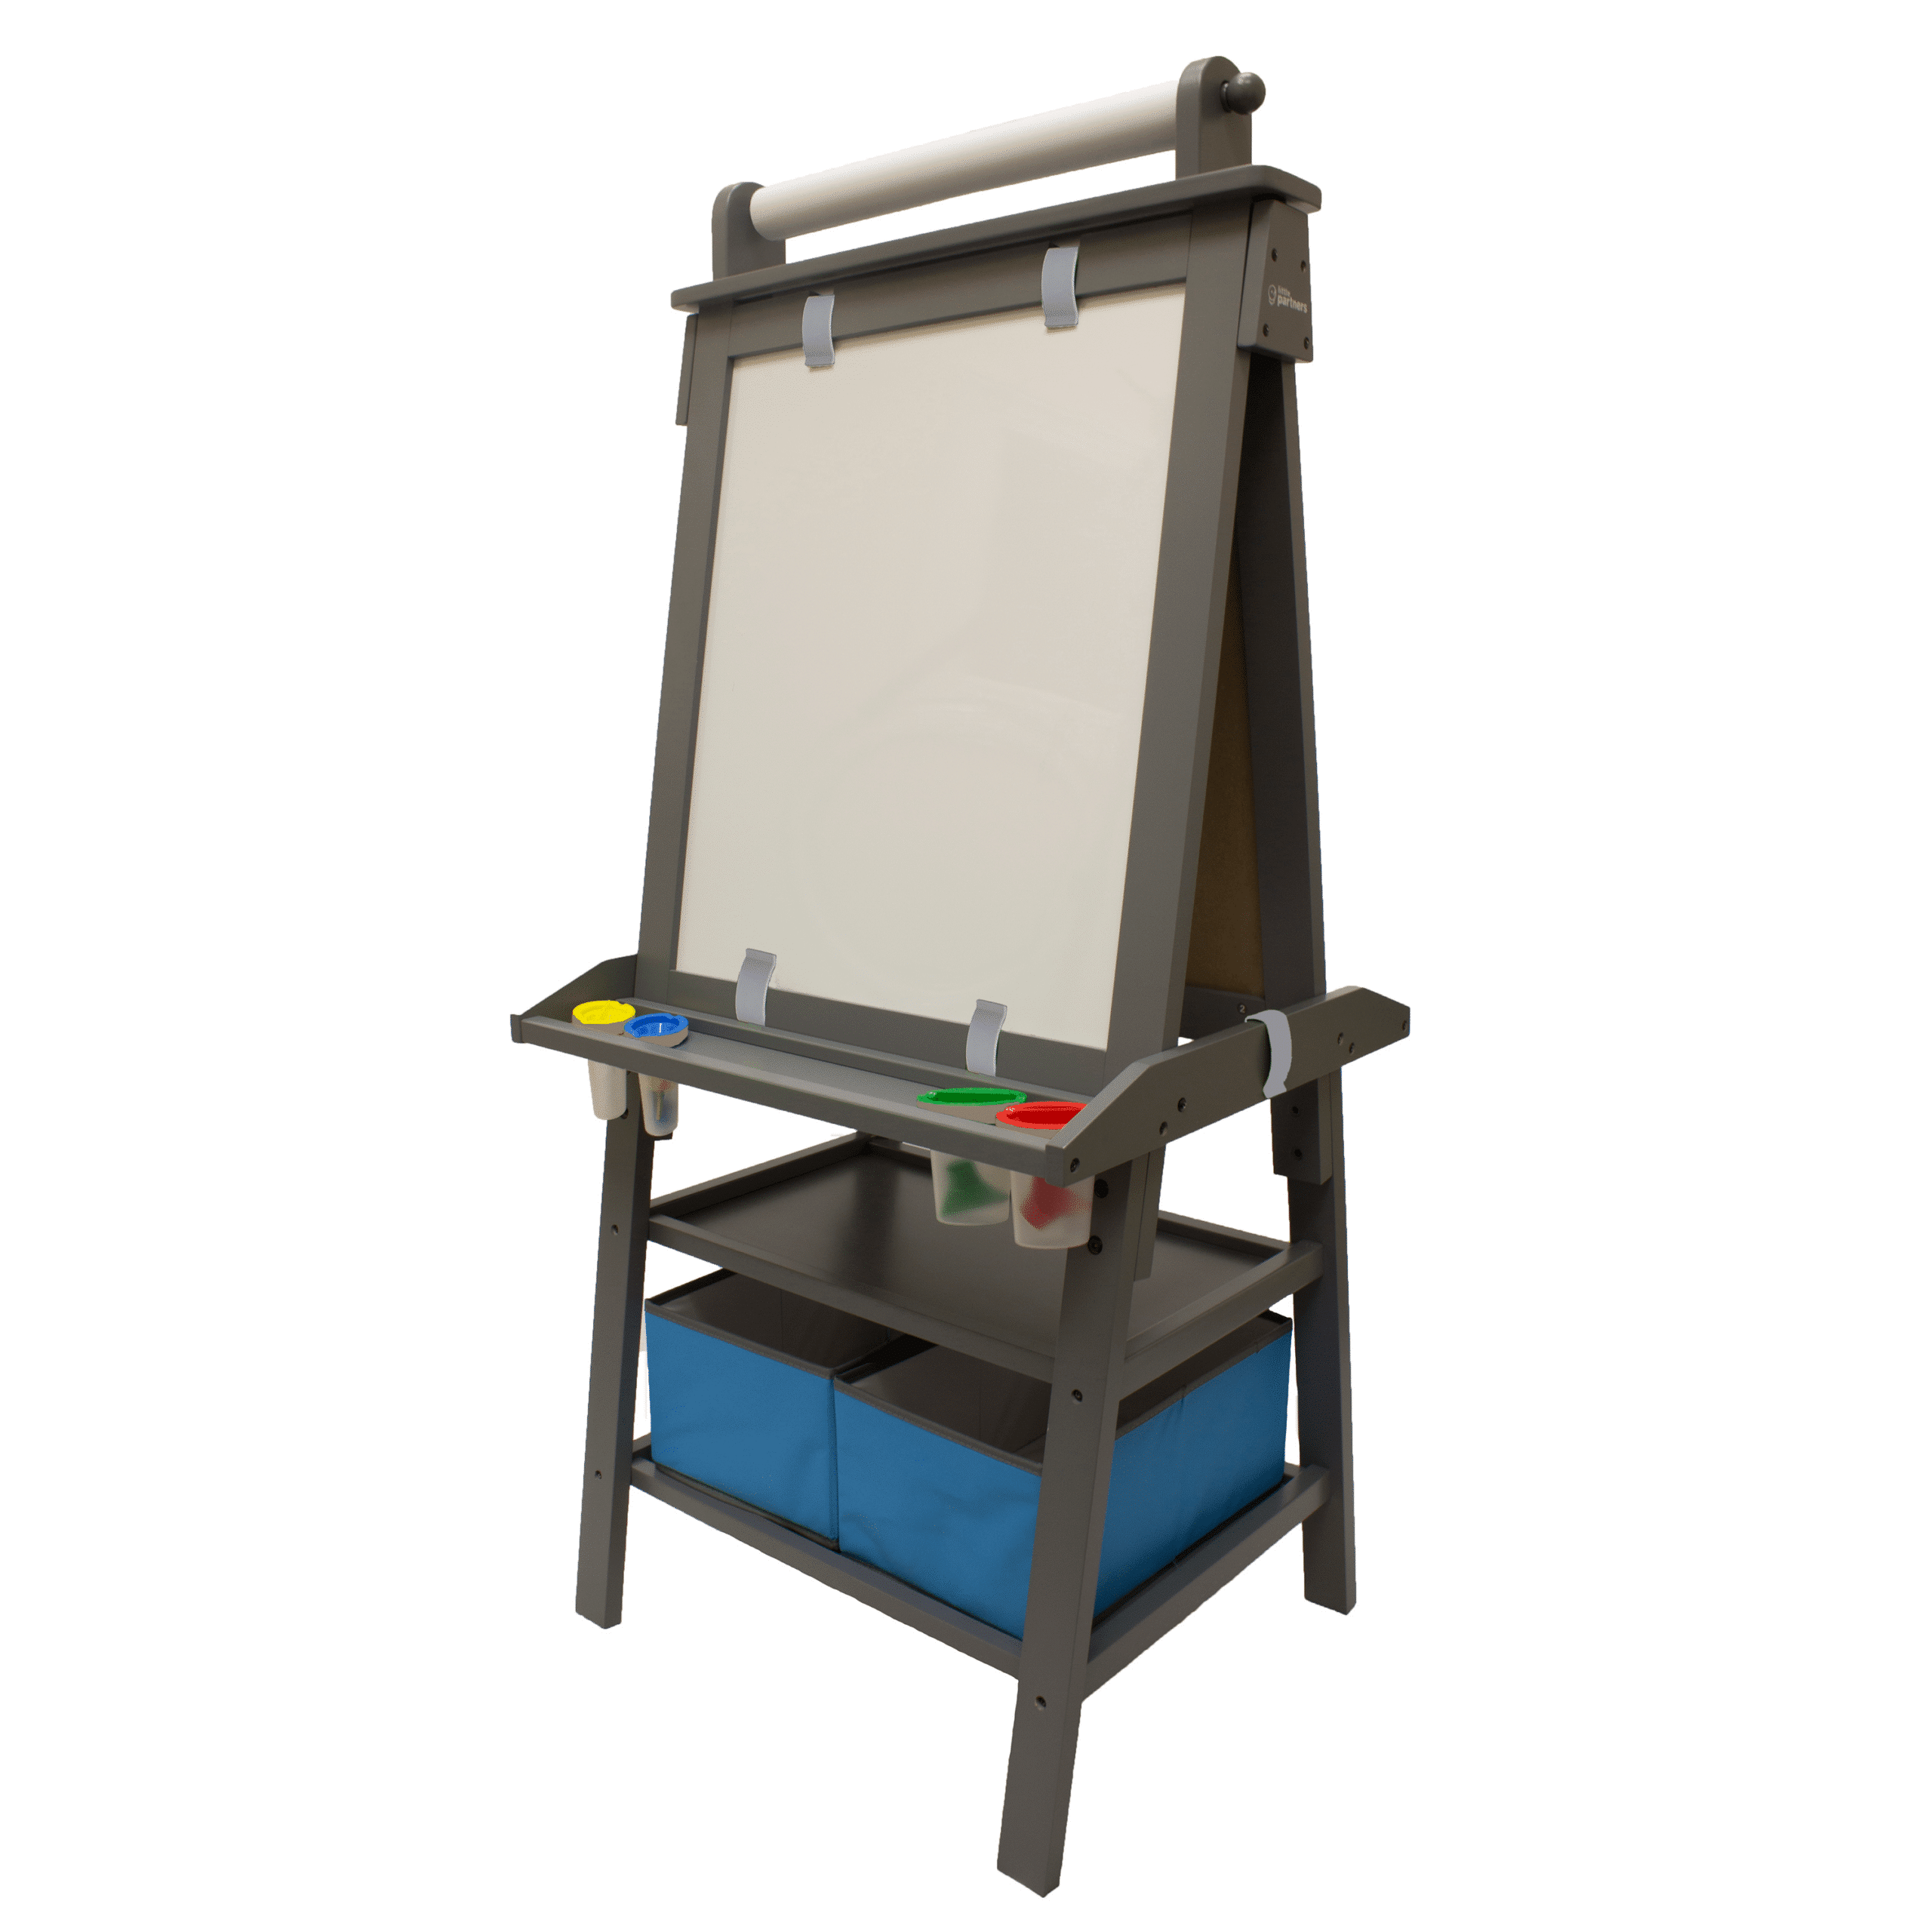 An image of a wooden art easel for children.